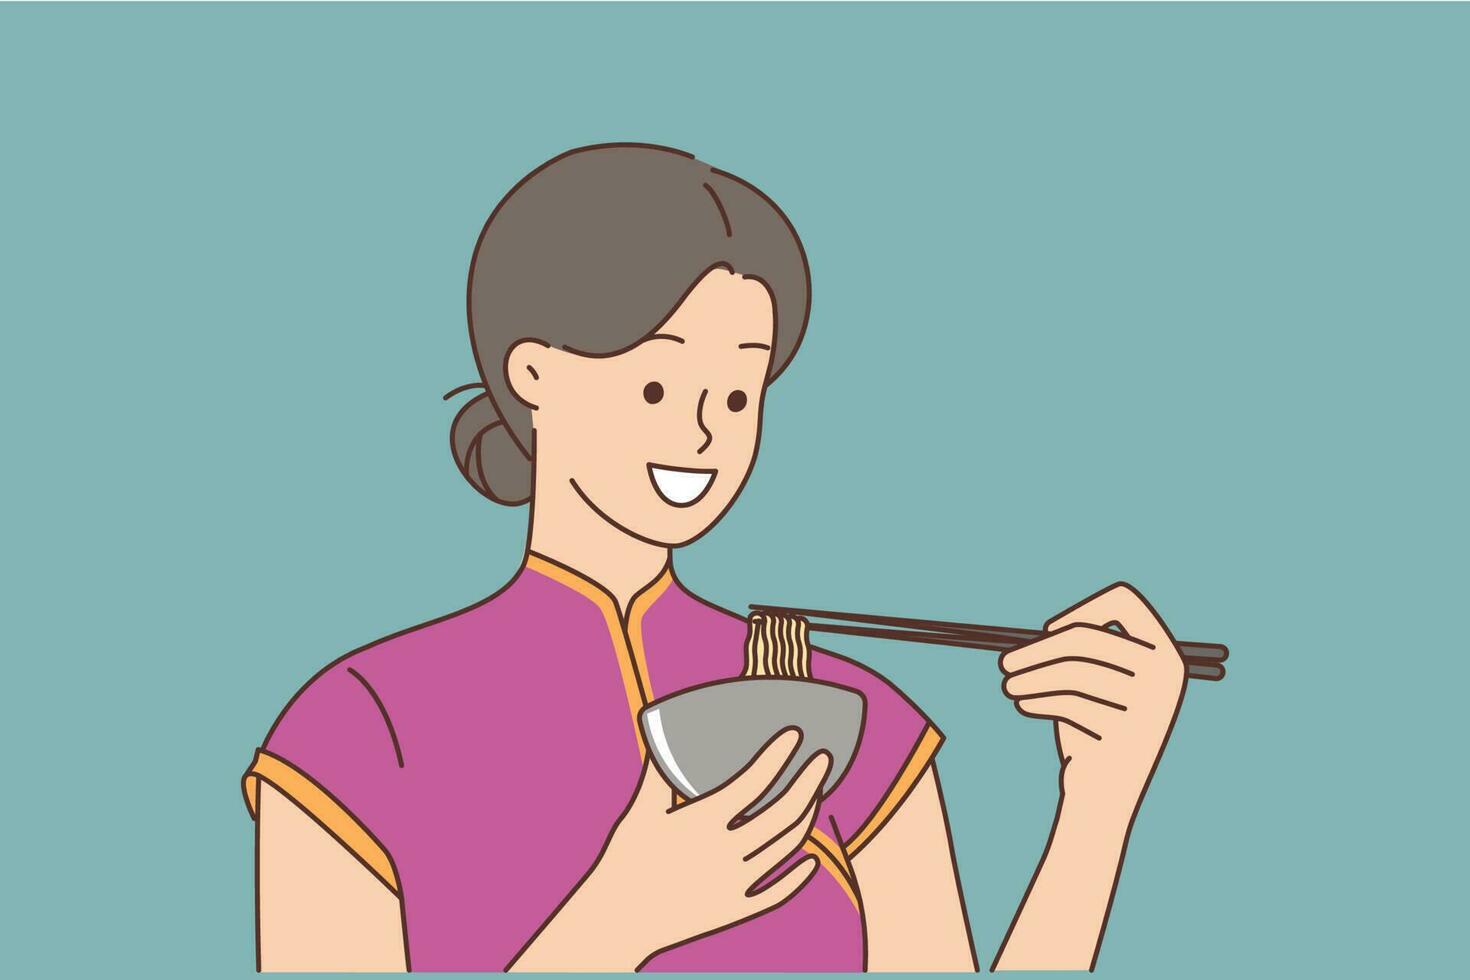 Smiling woman in traditional clothes eating noodle with chopsticks. Happy female enjoy Asian food from bowl. Culture and cuisine. Vector illustration.